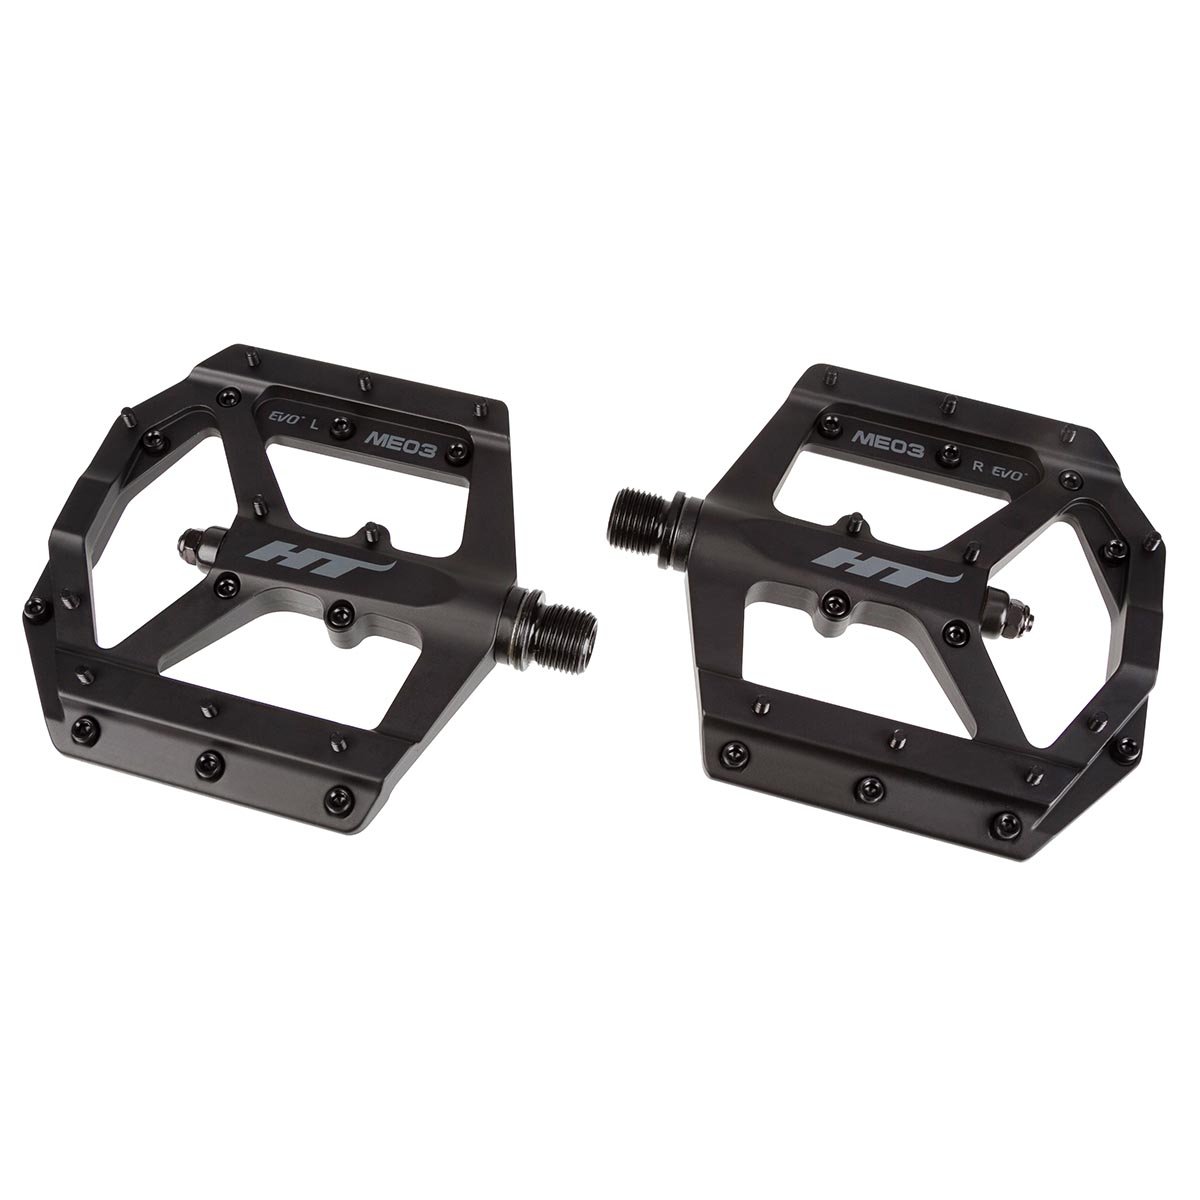 HT Components Pedals ME03 Stealth Black